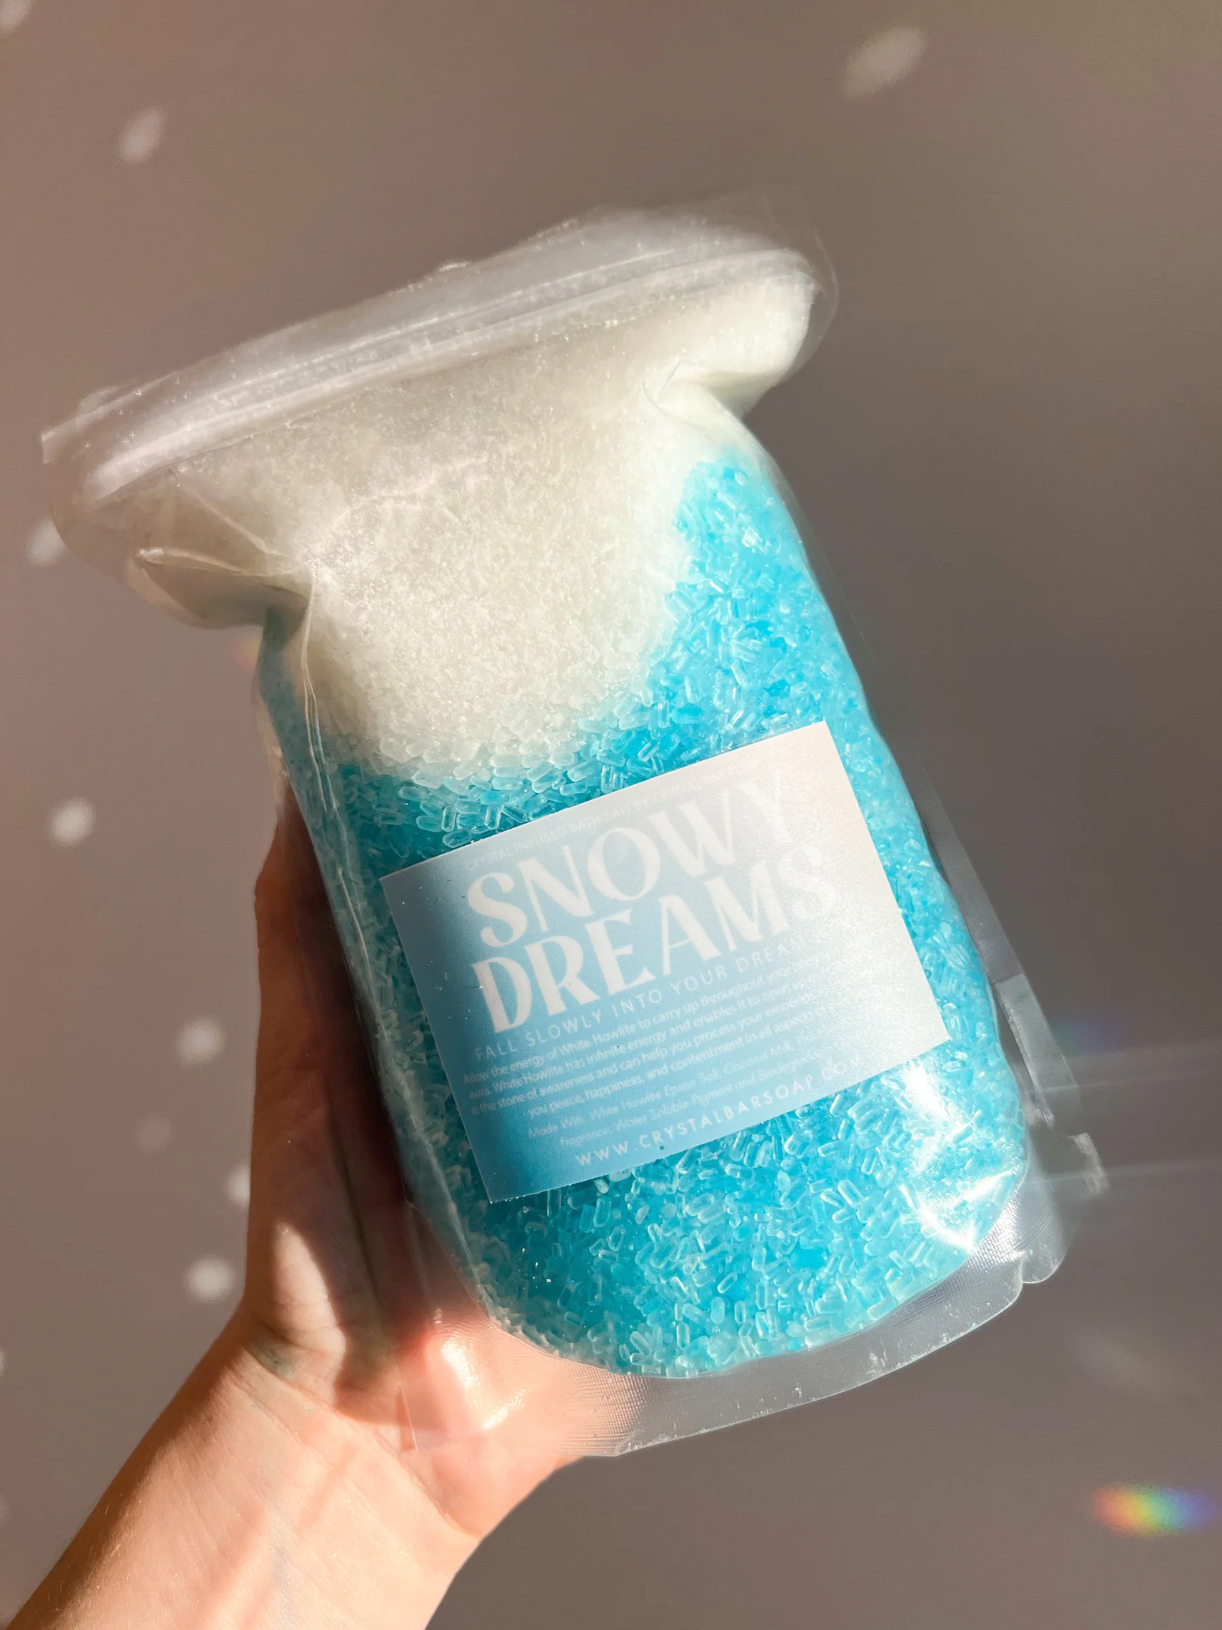 Winter Bliss: Embracing Tranquility with Snowy Dreams Bath Salt from Crystal Bar Soap